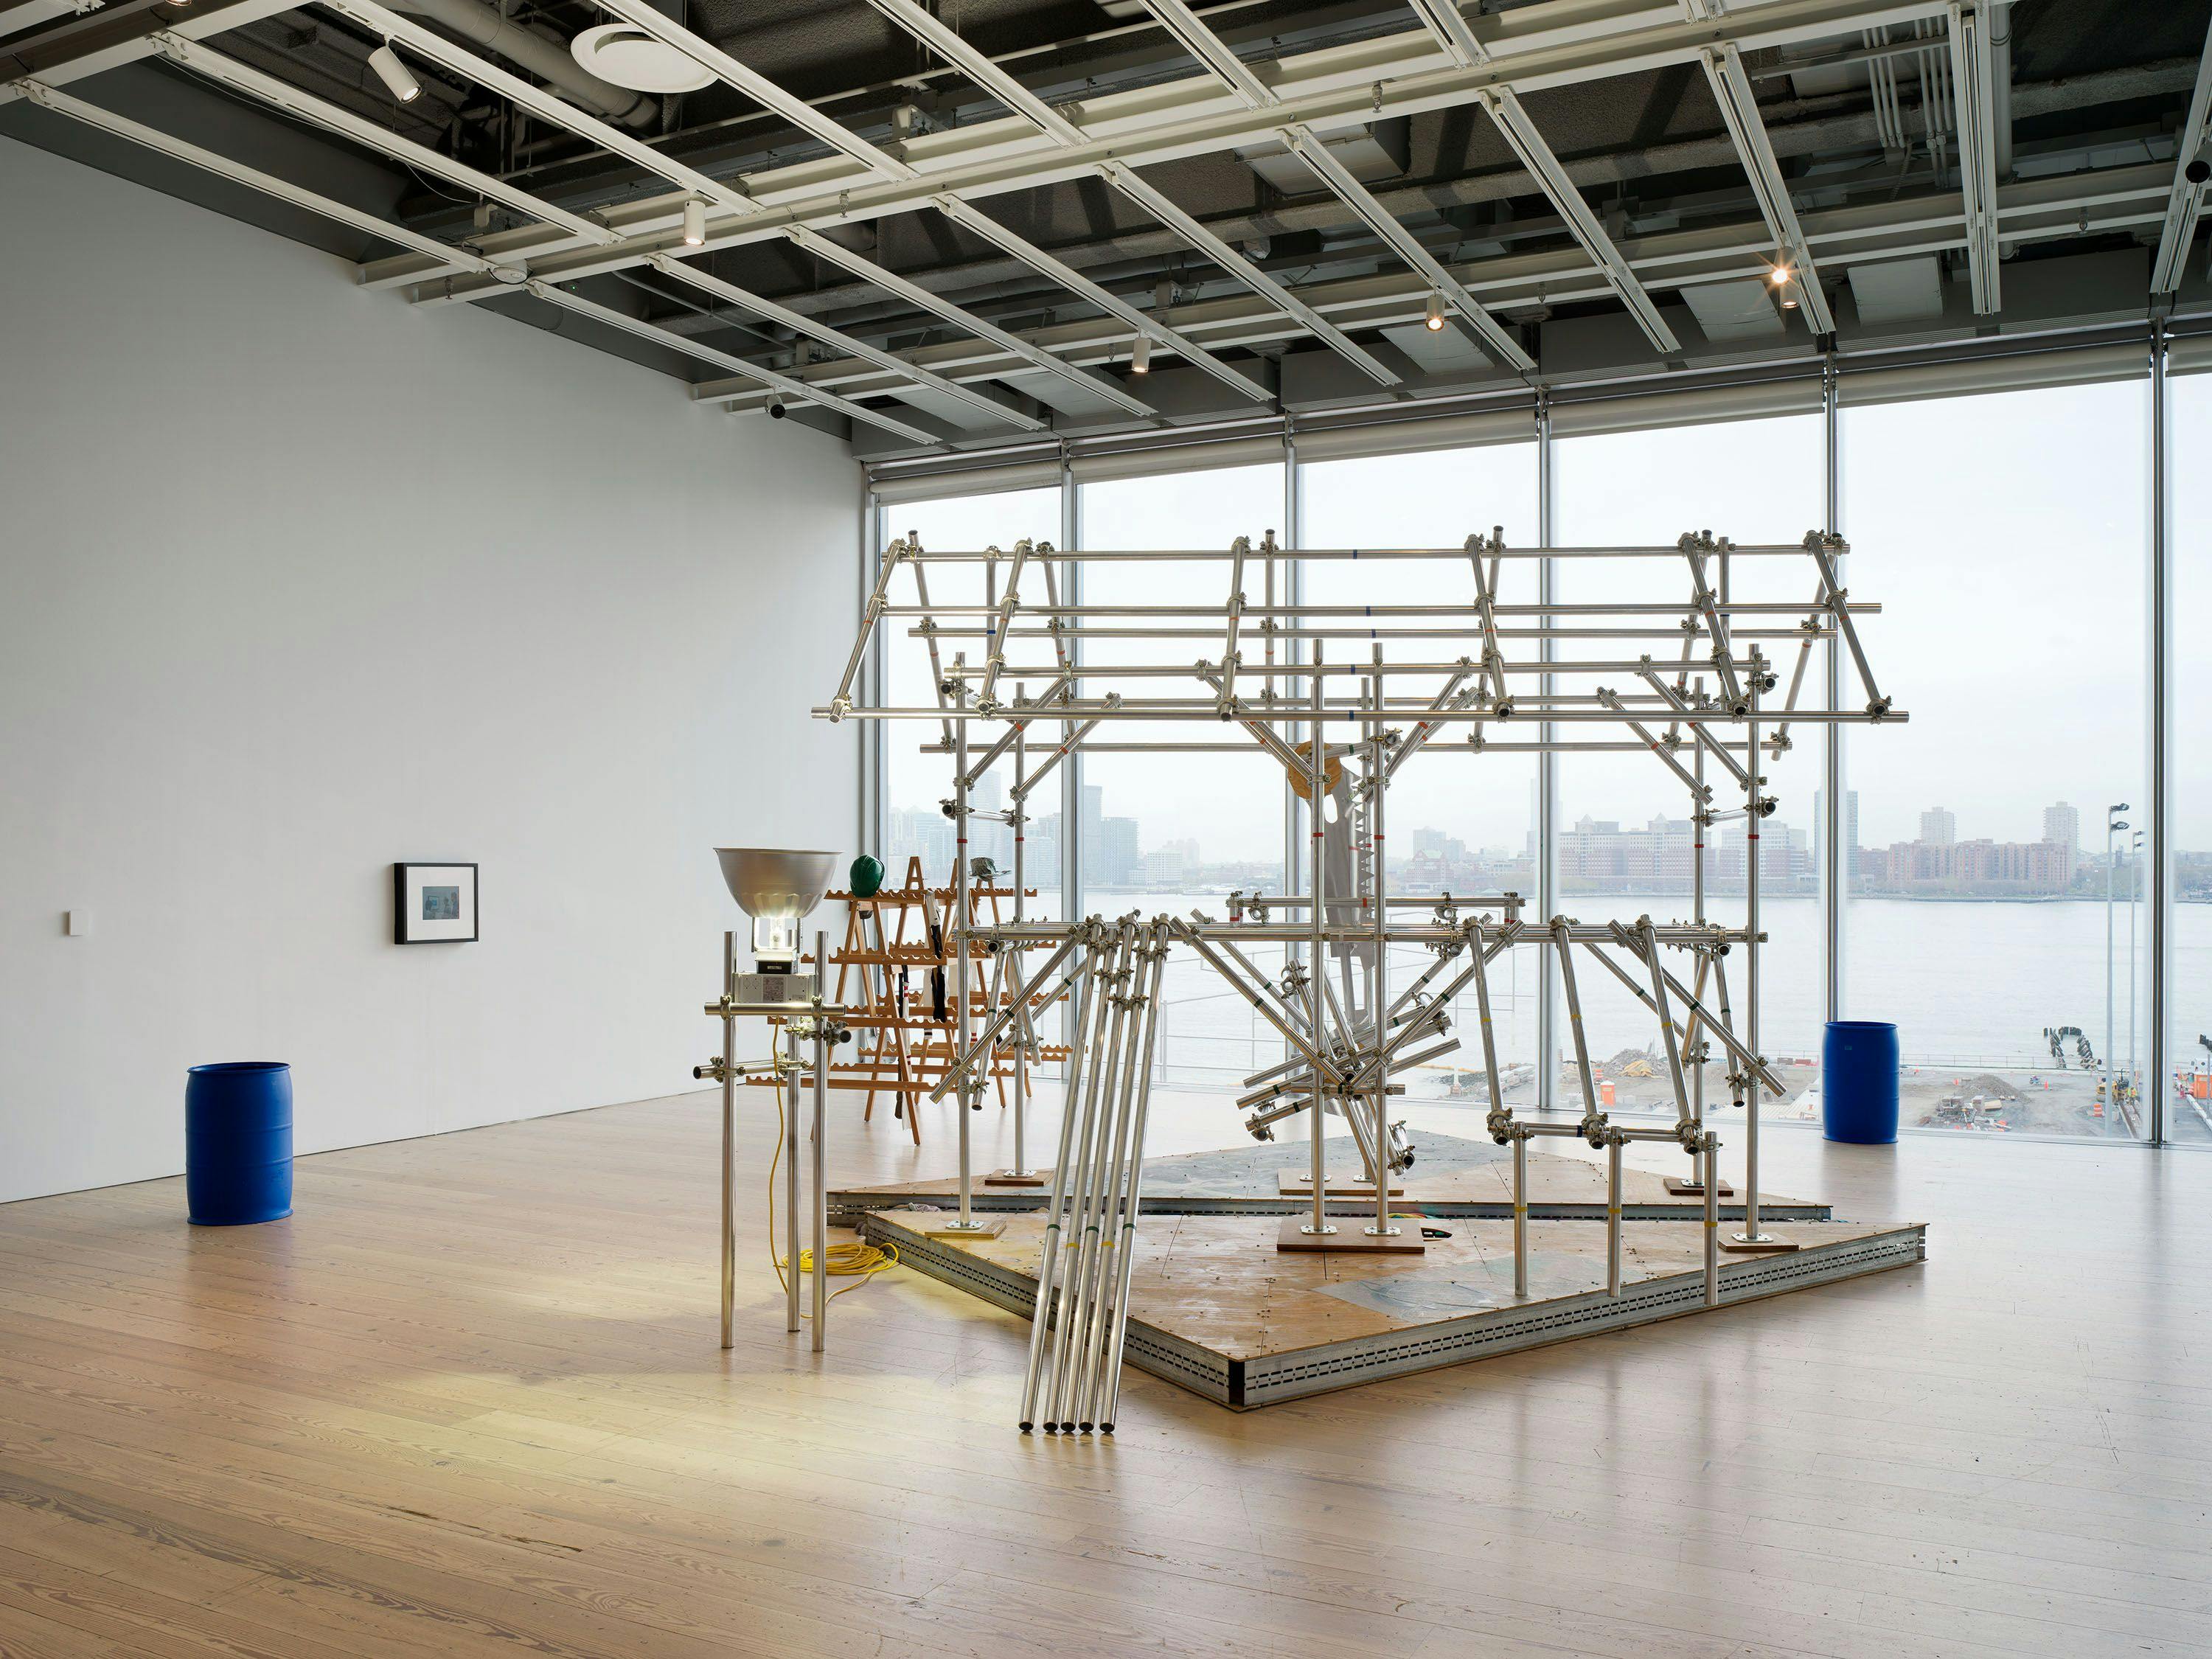 Installation view of Jason Rhoades: Sutter’s Mill (200), on view in Quiet as It’s Kept, at the Whitney Biennial at the Whitney Museum of American Art in New York, dated 2022.